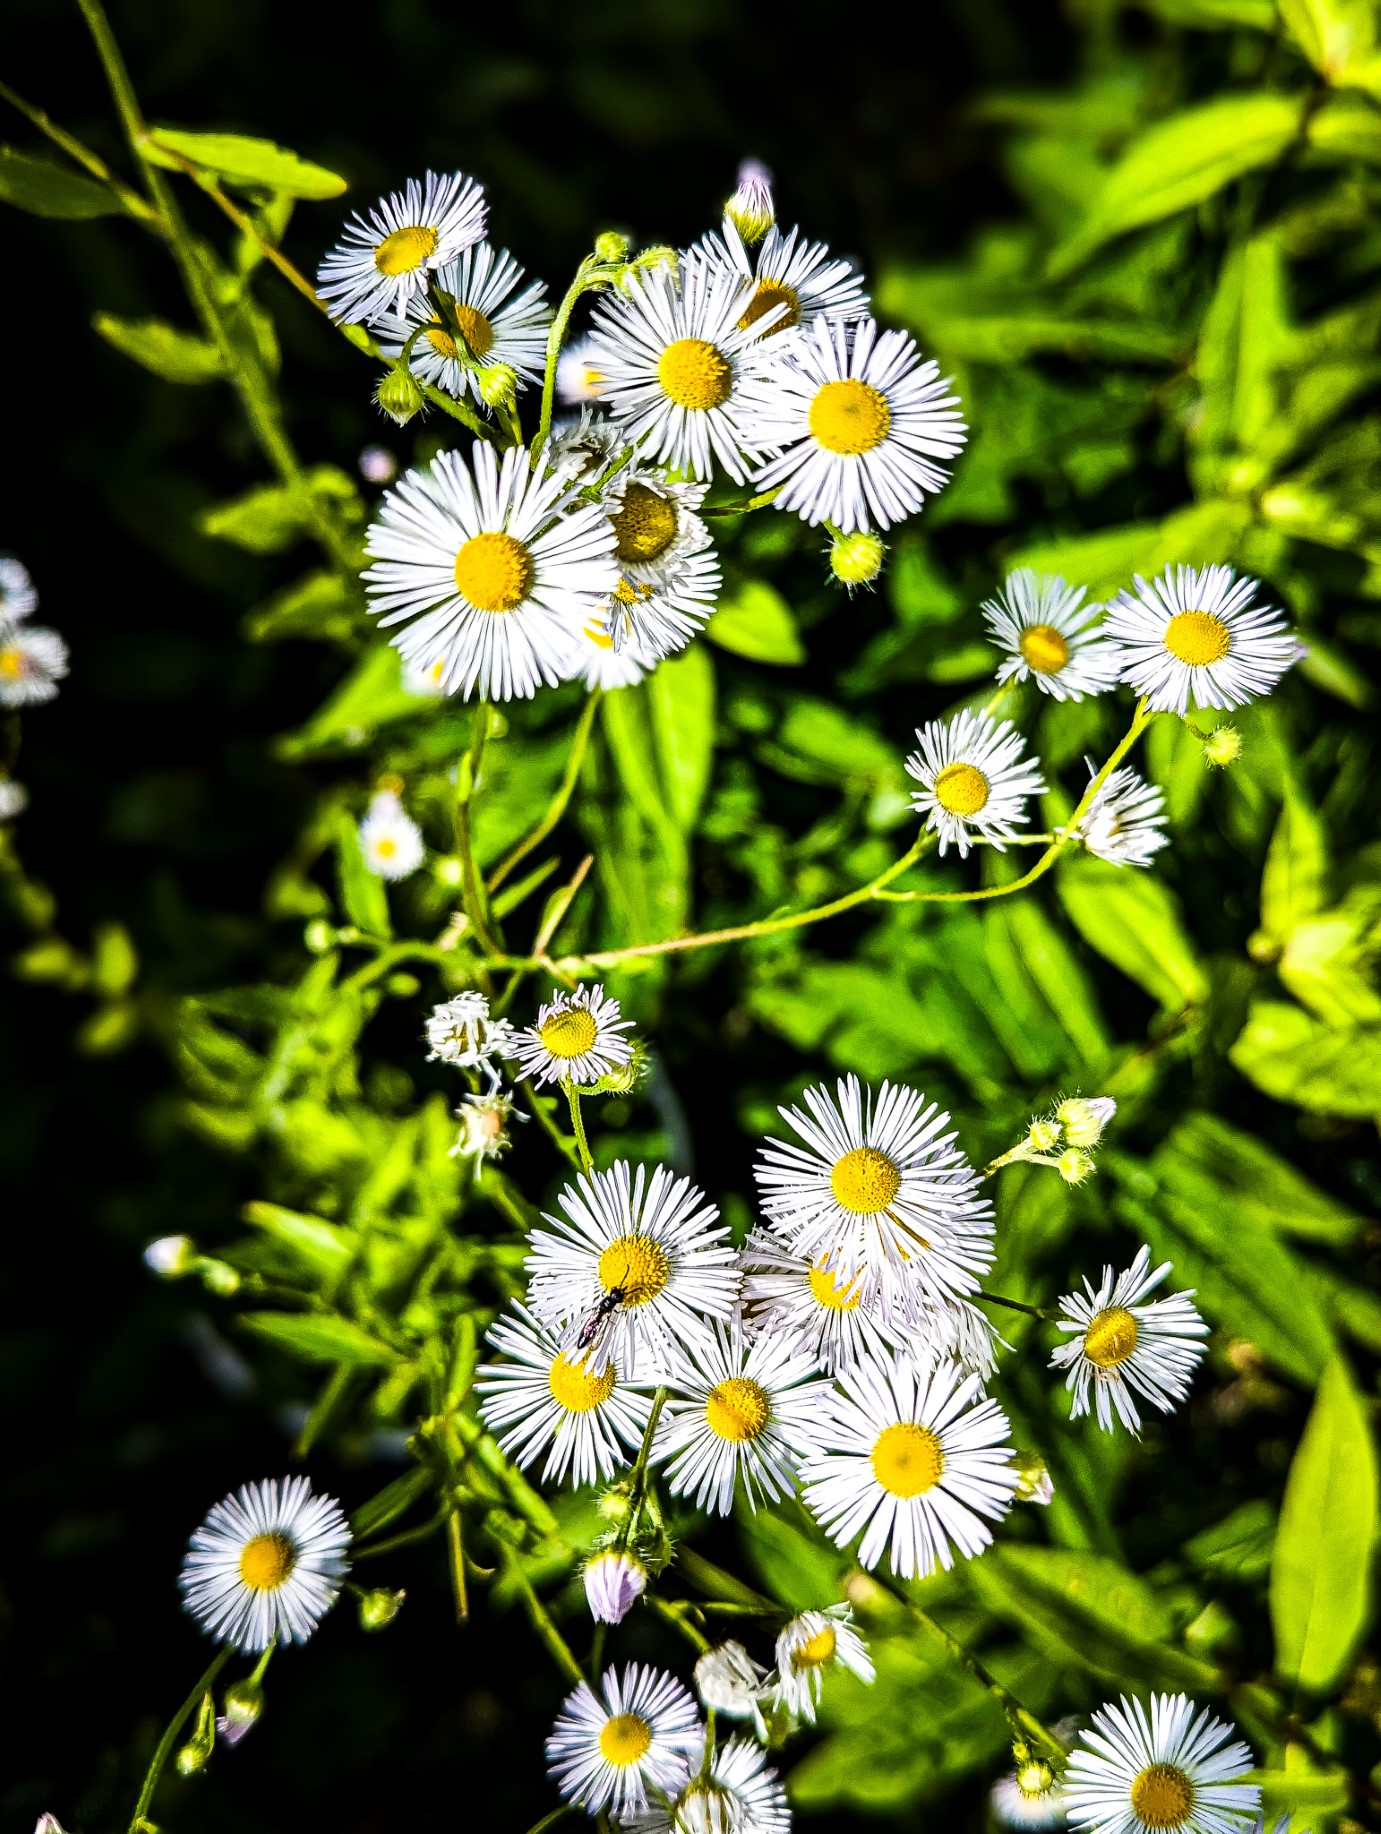 Daisy fleabane is a flowering plant in the family Asteraceae.